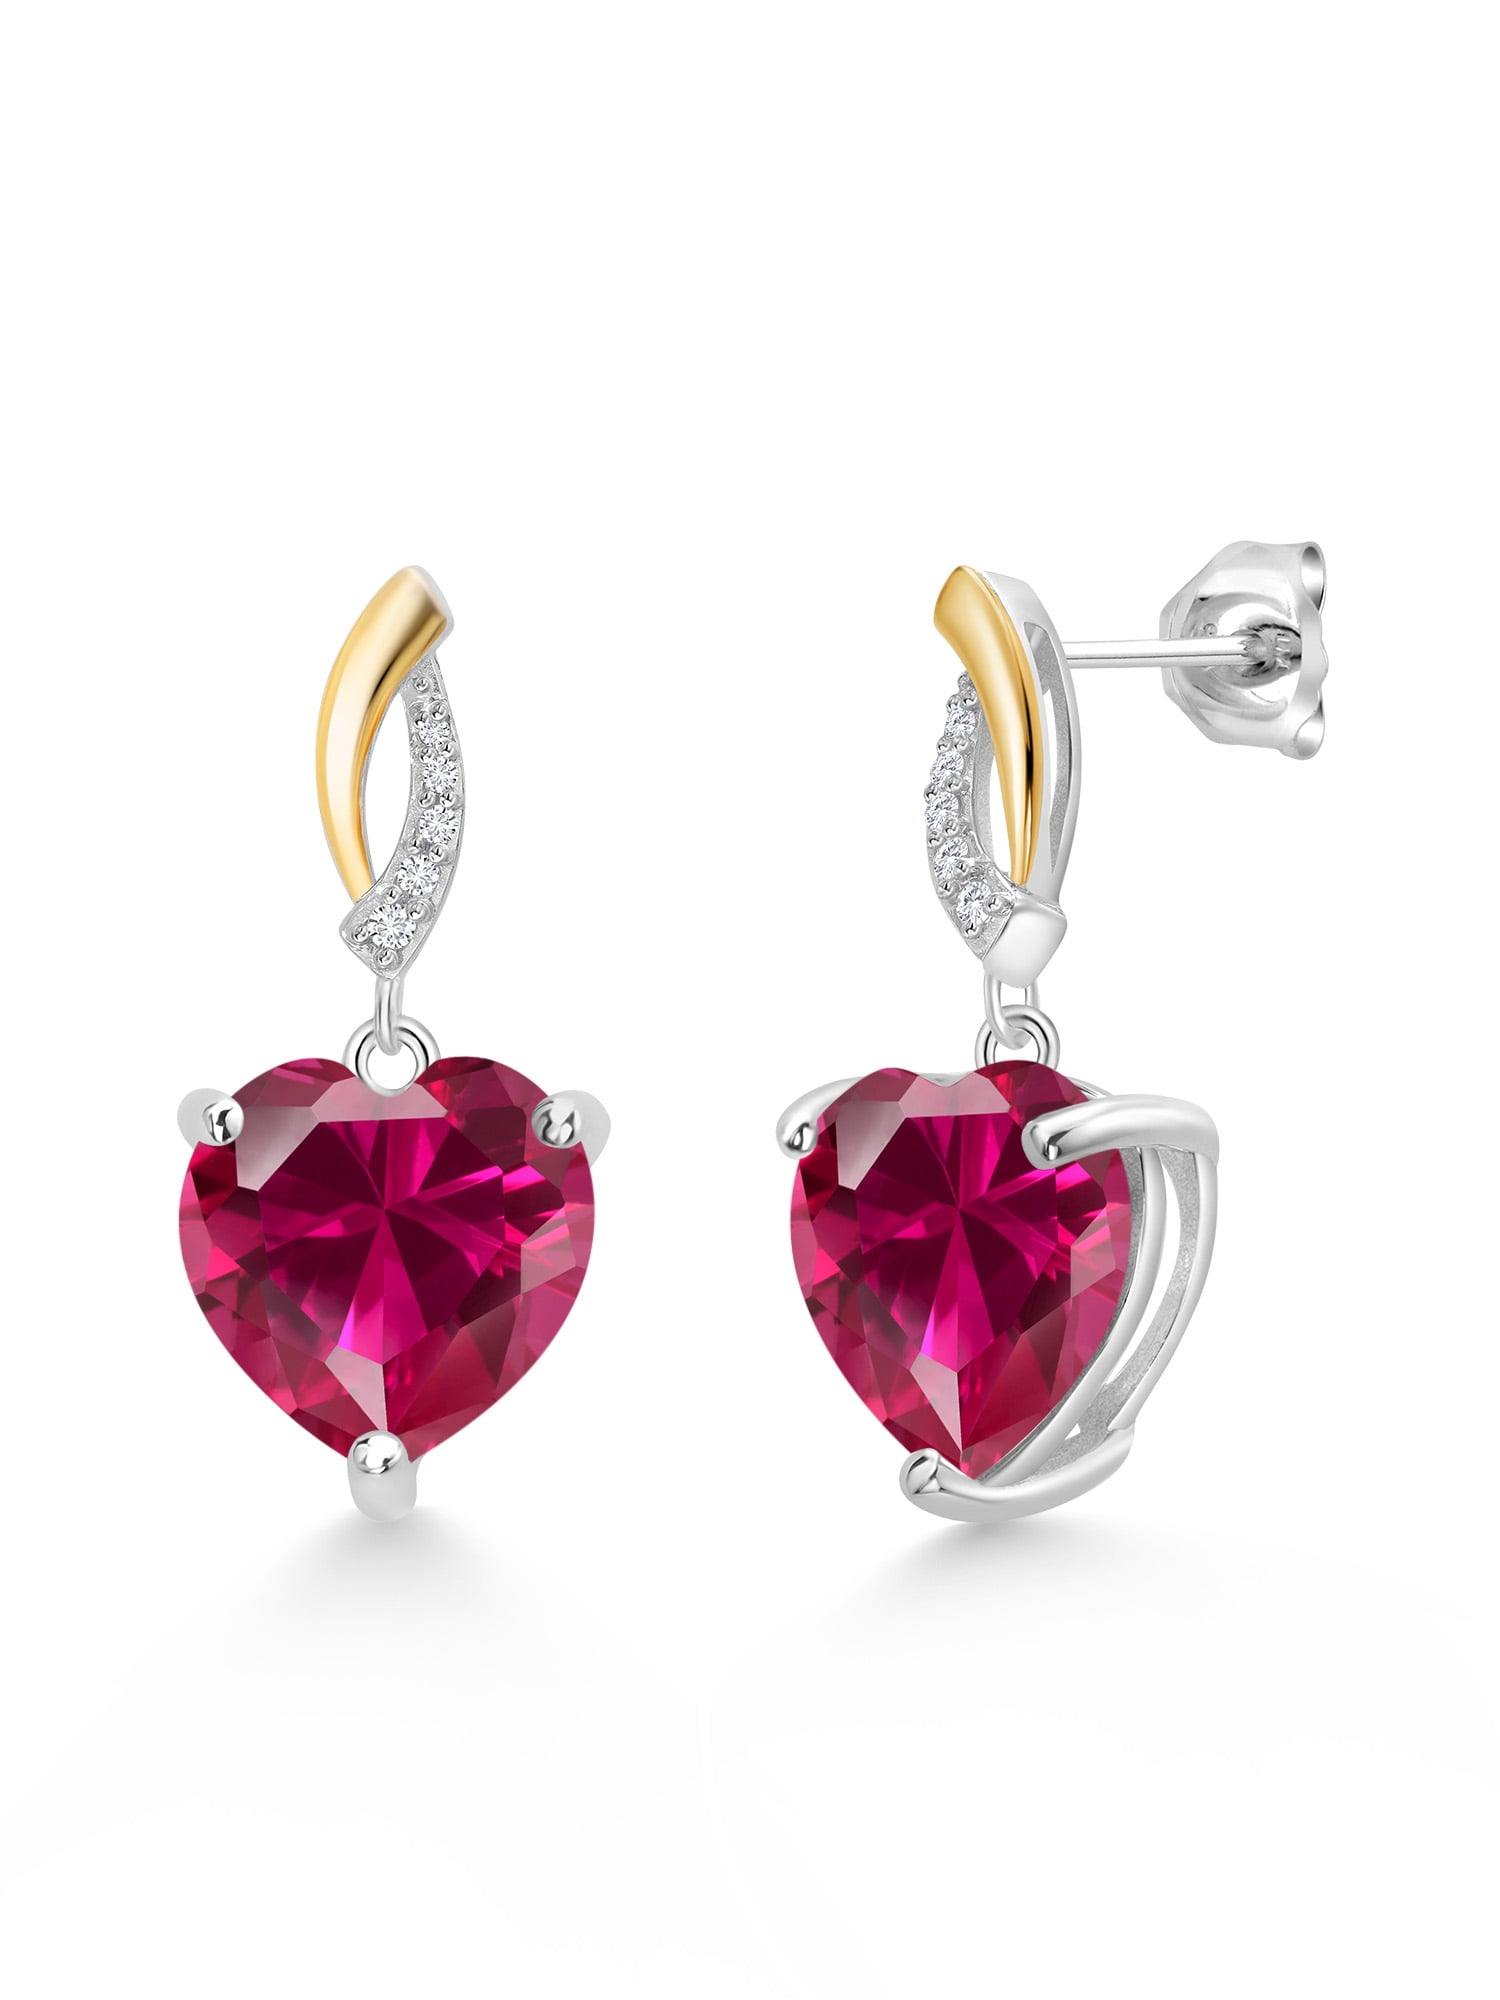 Details about   Top Quality 925 Sterling Silver Ruby Gemstone Flower White Gold Color Earrings